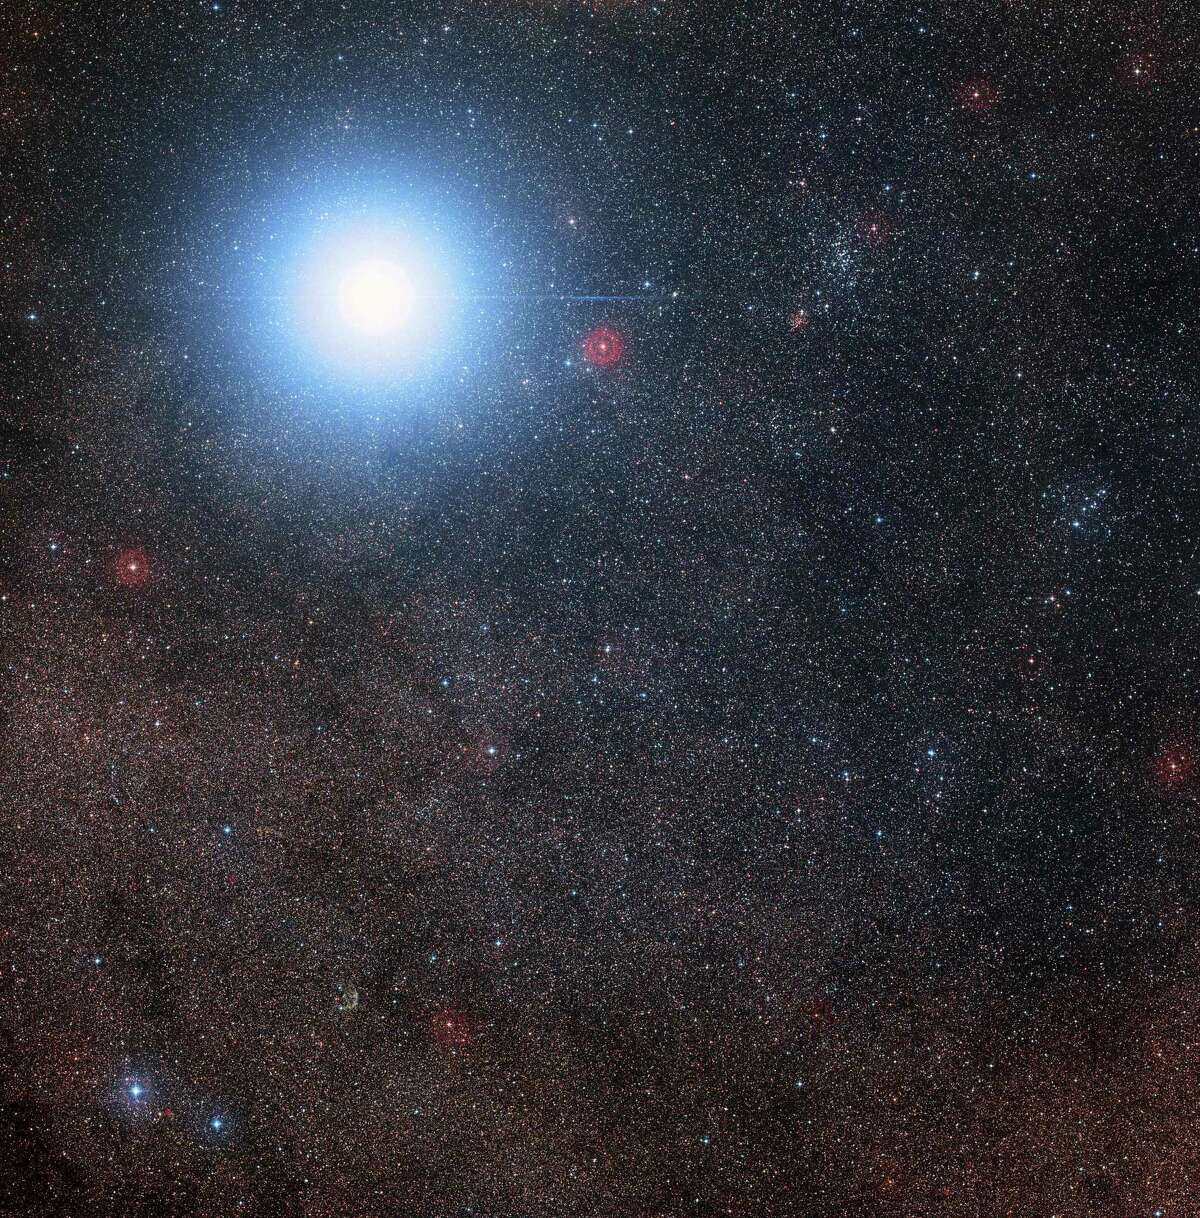 A hand out image made available by the European Southern Observatory on August 24 2016 show an image created from pictures forming part of the Digitized Sky Survey 2 of the sky around the bright star Alpha Centauri AB also shows the much fainter red dwarf star, Proxima Centauri, the closest star to the Solar System. The blue halo around Alpha Centauri AB is an artifact of the photographic process, the star is really pale yellow in colour like the Sun. Scientists on August 24, 2016 announced the discovery of an Earth-sized planet orbiting the star nearest our Sun, opening up the glittering prospect of a habitable world that may one day be explored by robots. Named Proxima b, the planet is in a "temperate" zone compatible with the presence of liquid water -- a key ingredient for life. / AFP PHOTO / EUROPEAN SOUTHERN OBSERVATORY / Davide De Martin/Mahdi Zamani / RESTRICTED TO EDITORIAL USE - MANDATORY CREDIT "AFP PHOTO / EUROPEAN SOUTHERN OBSERVATORY/ DAVIDE DE MARTIN MAHDI ZAMANI- NO MARKETING NO ADVERTISING CAMPAIGNS - DISTRIBUTED AS A SERVICE TO CLIENTS DAVIDE DE MARTIN/MAHDI ZAMANI/AFP/Getty Images